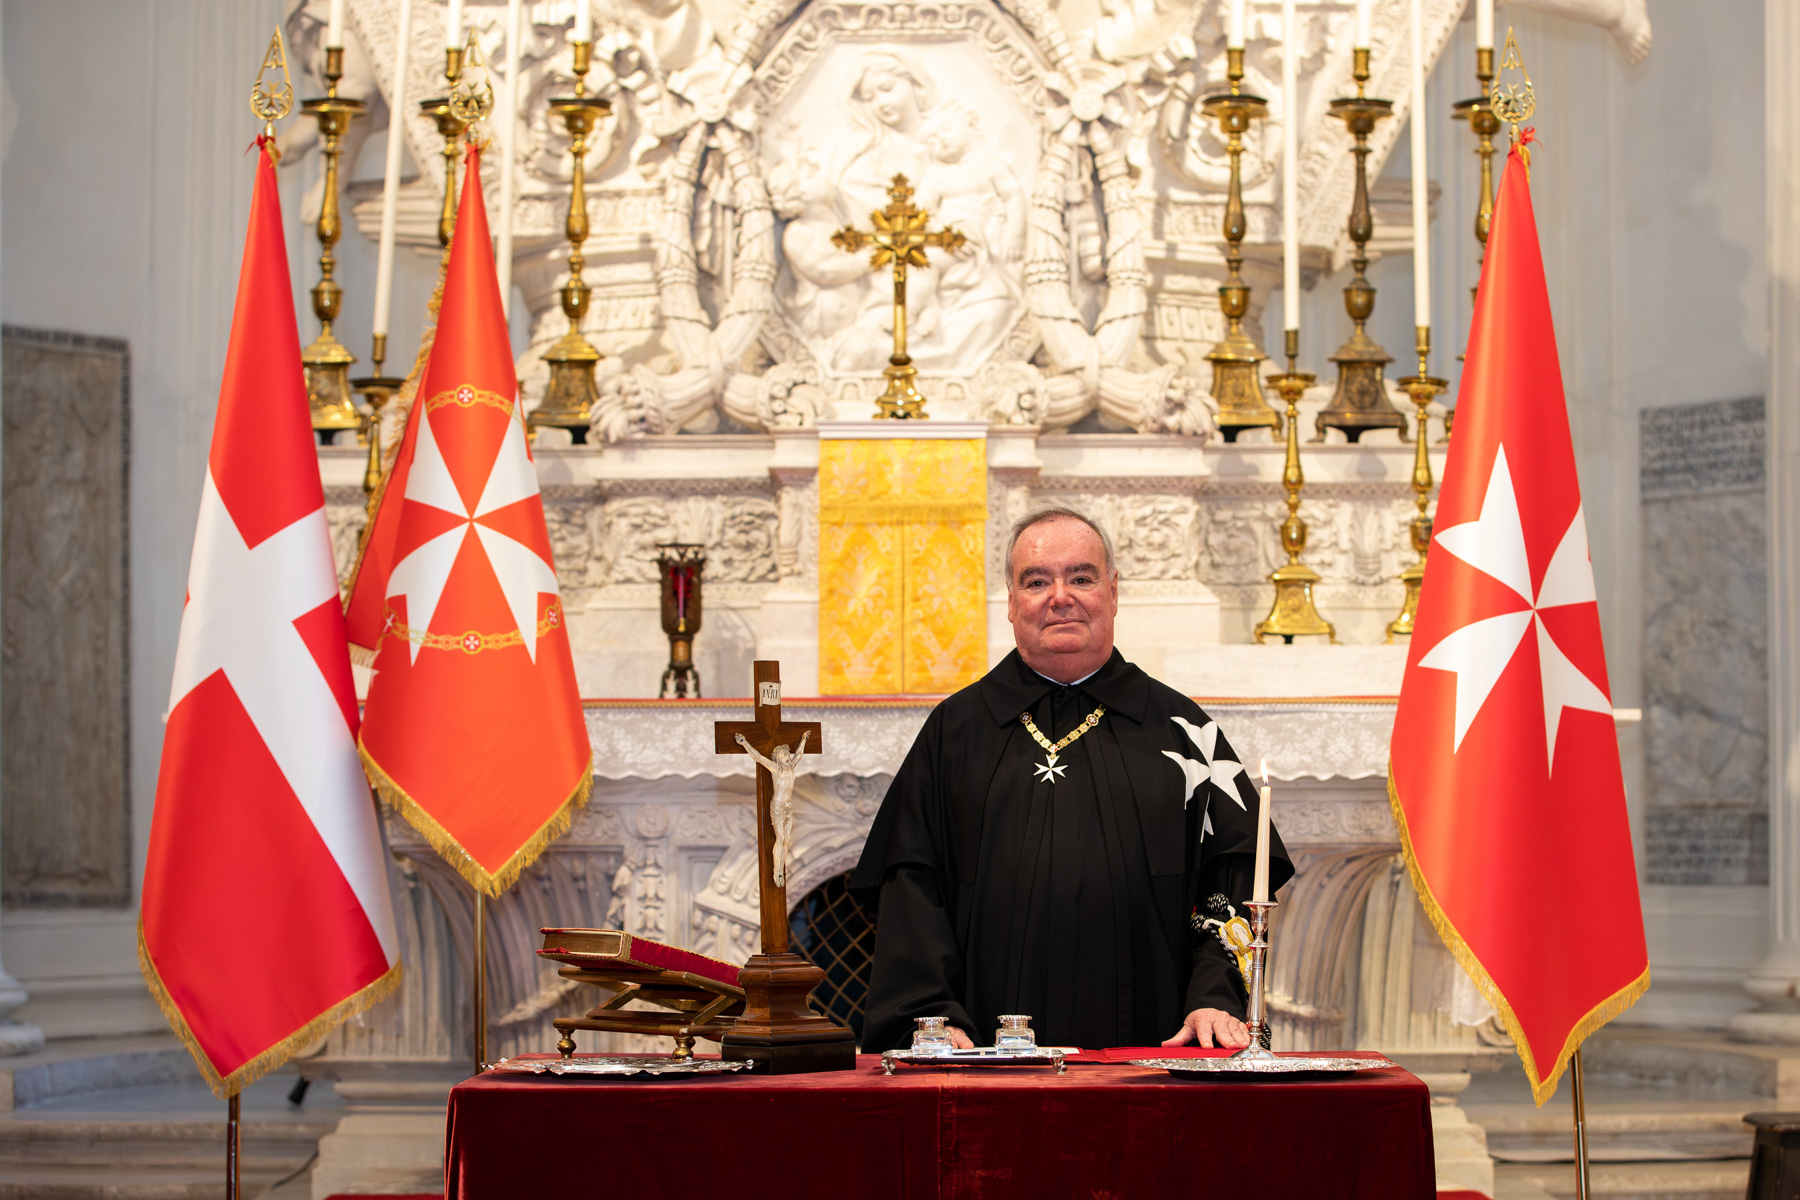 order of malta celebrated its founder fra gerard 900 years after his death